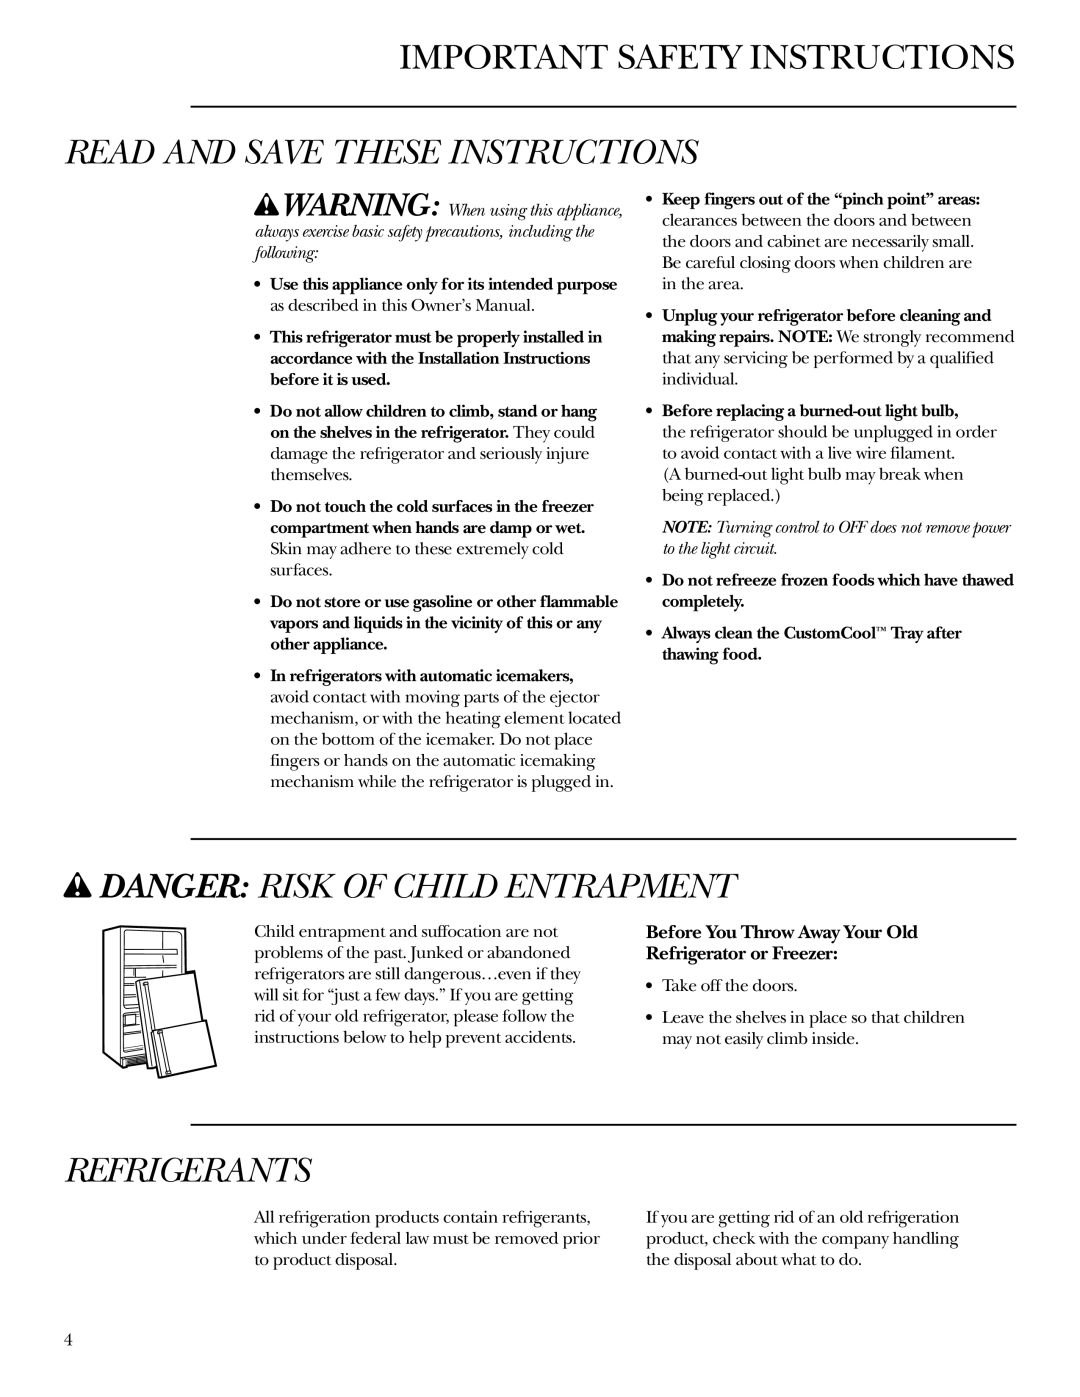 GE r10965v-1 owner manual Important Safety Instructions, Read And Save These Instructions, wDANGER RISK OF CHILD ENTRAPMENT 